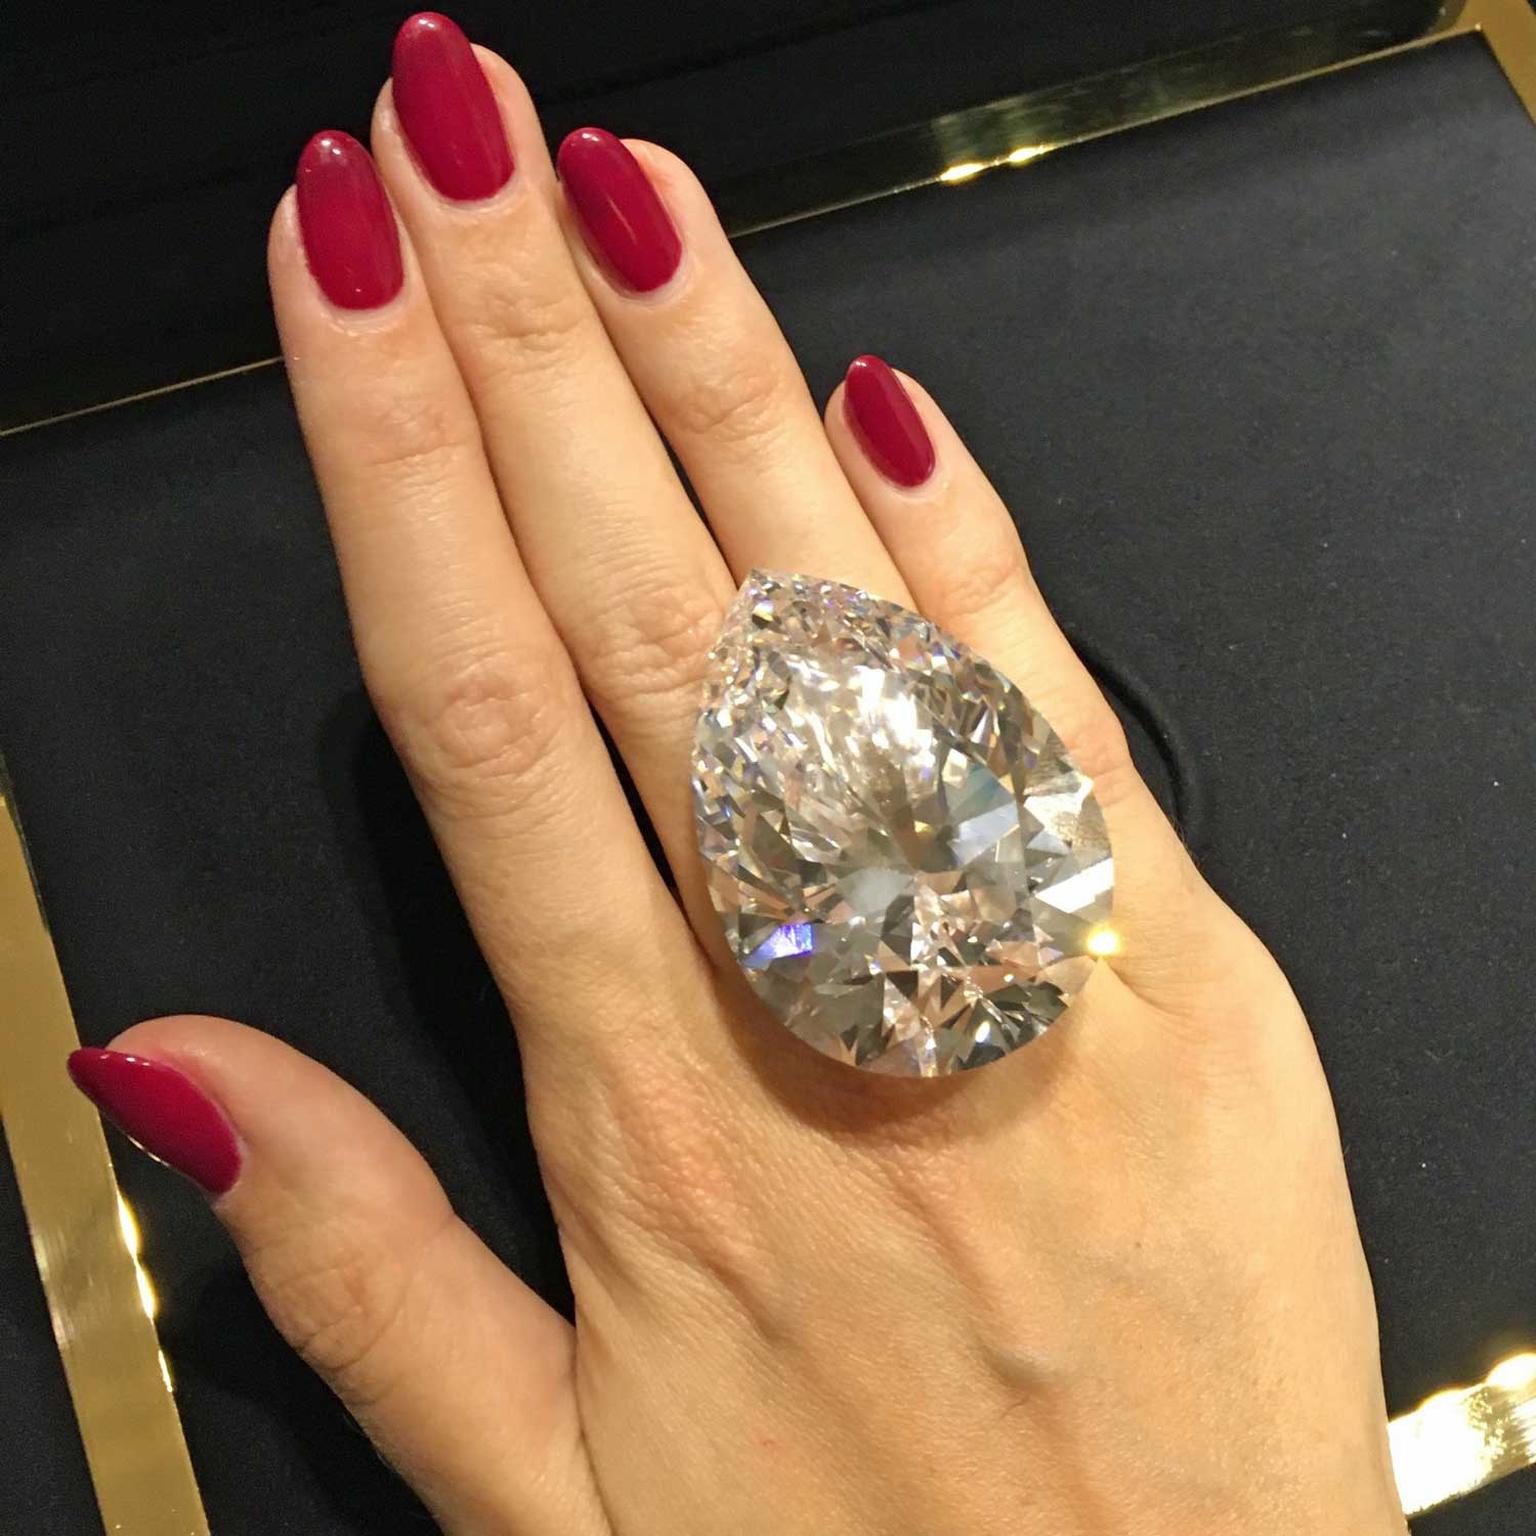 The Harrods 228.31-carat diamond, which is a G colour with VS1 clarity